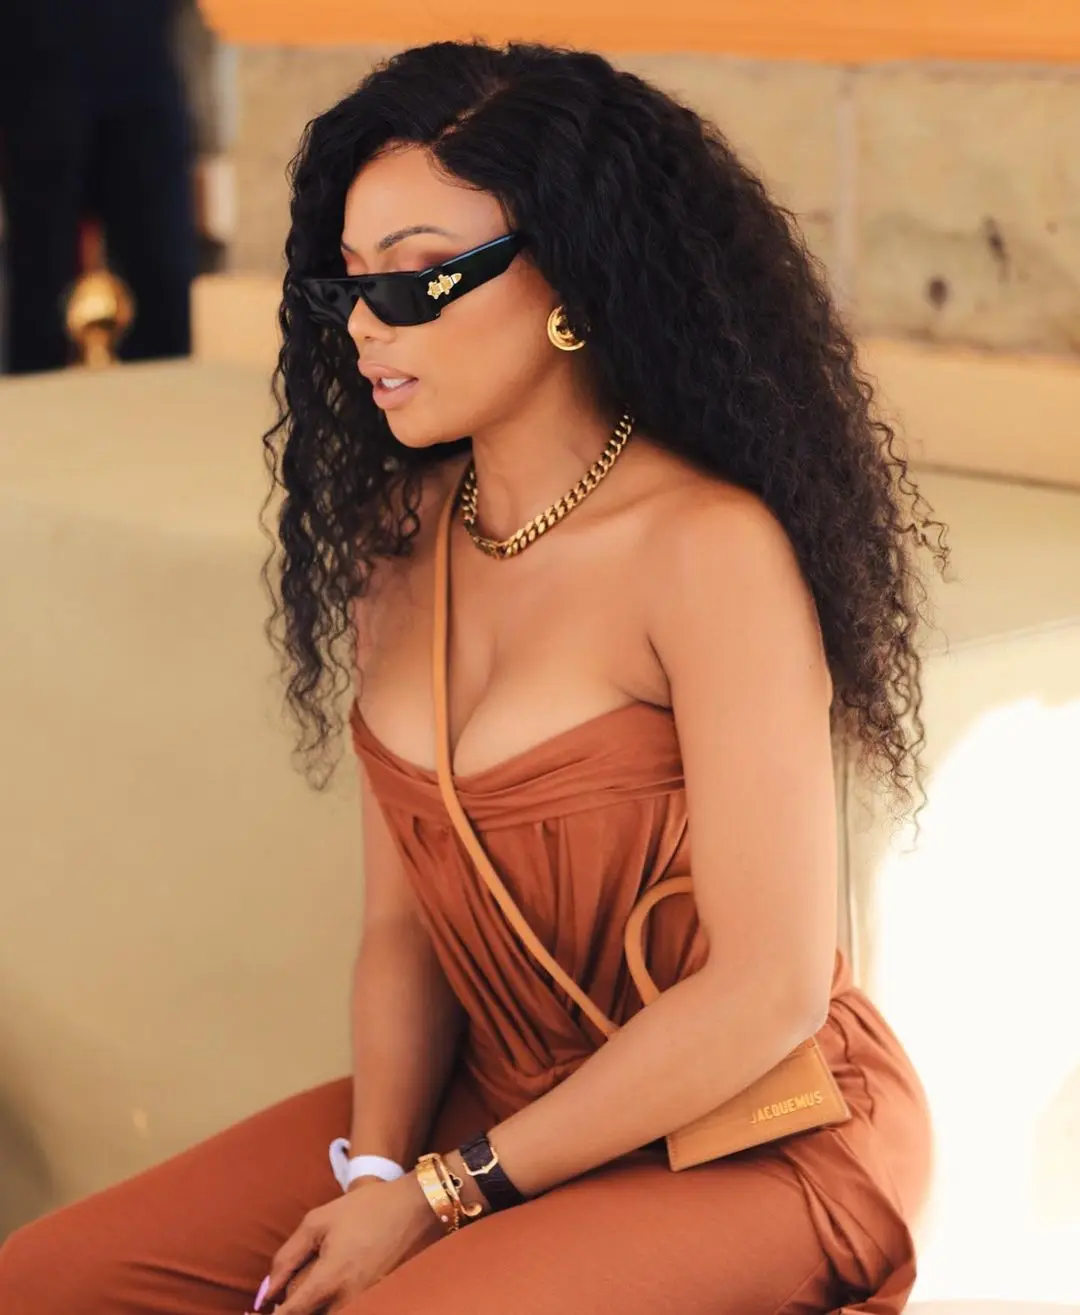 Unknown woman rams into Bonang’s car and flees the scene